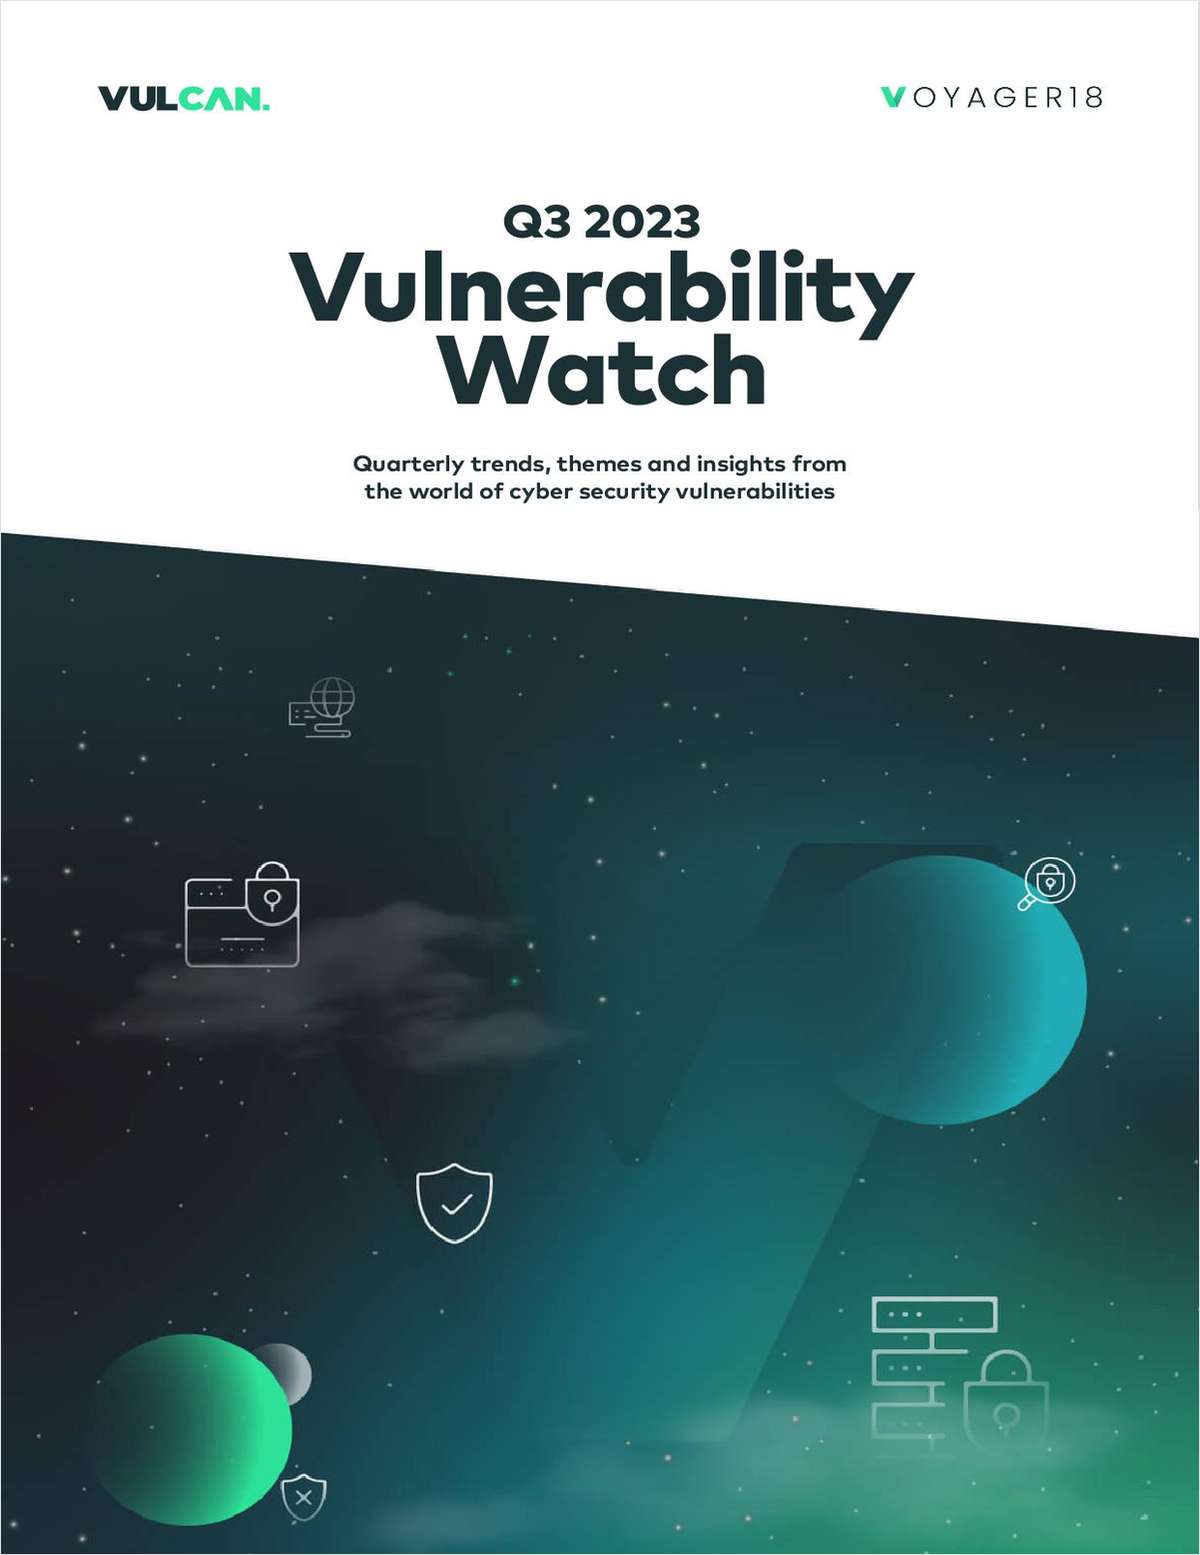 Cyber security trends - the Q3 2023 Vulnerability Watch